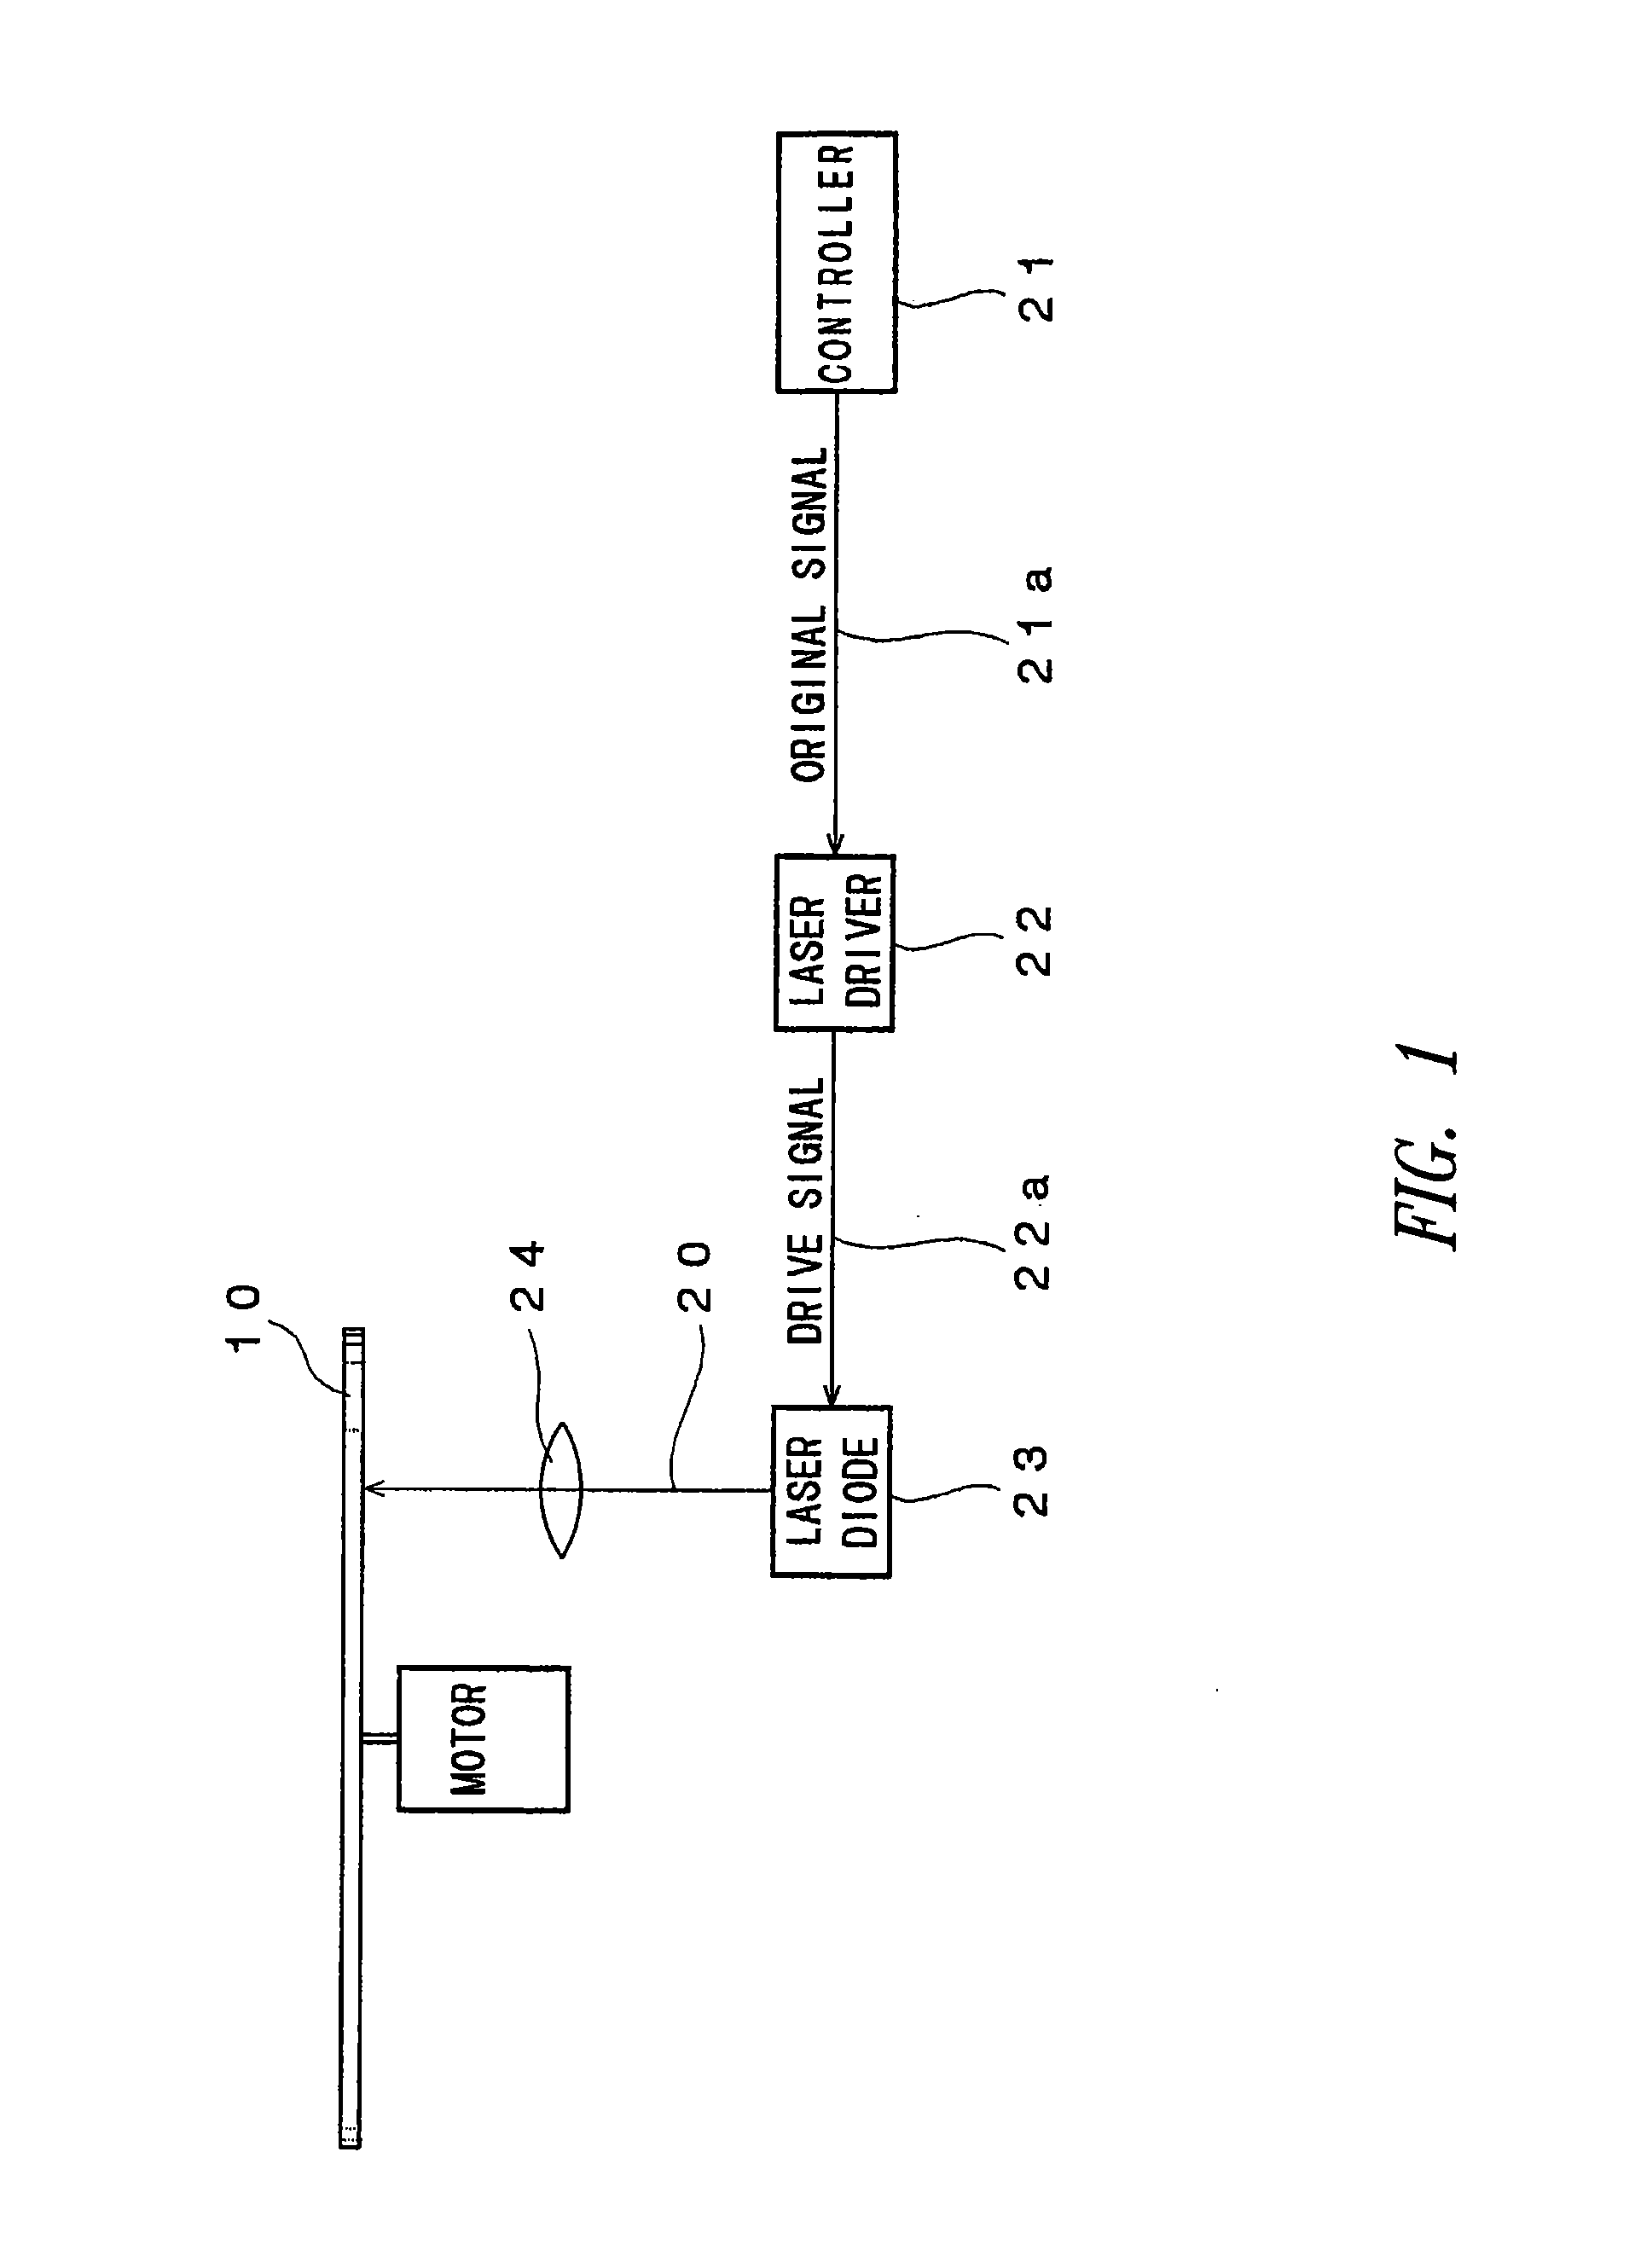 Optical recording method for high transfer rates